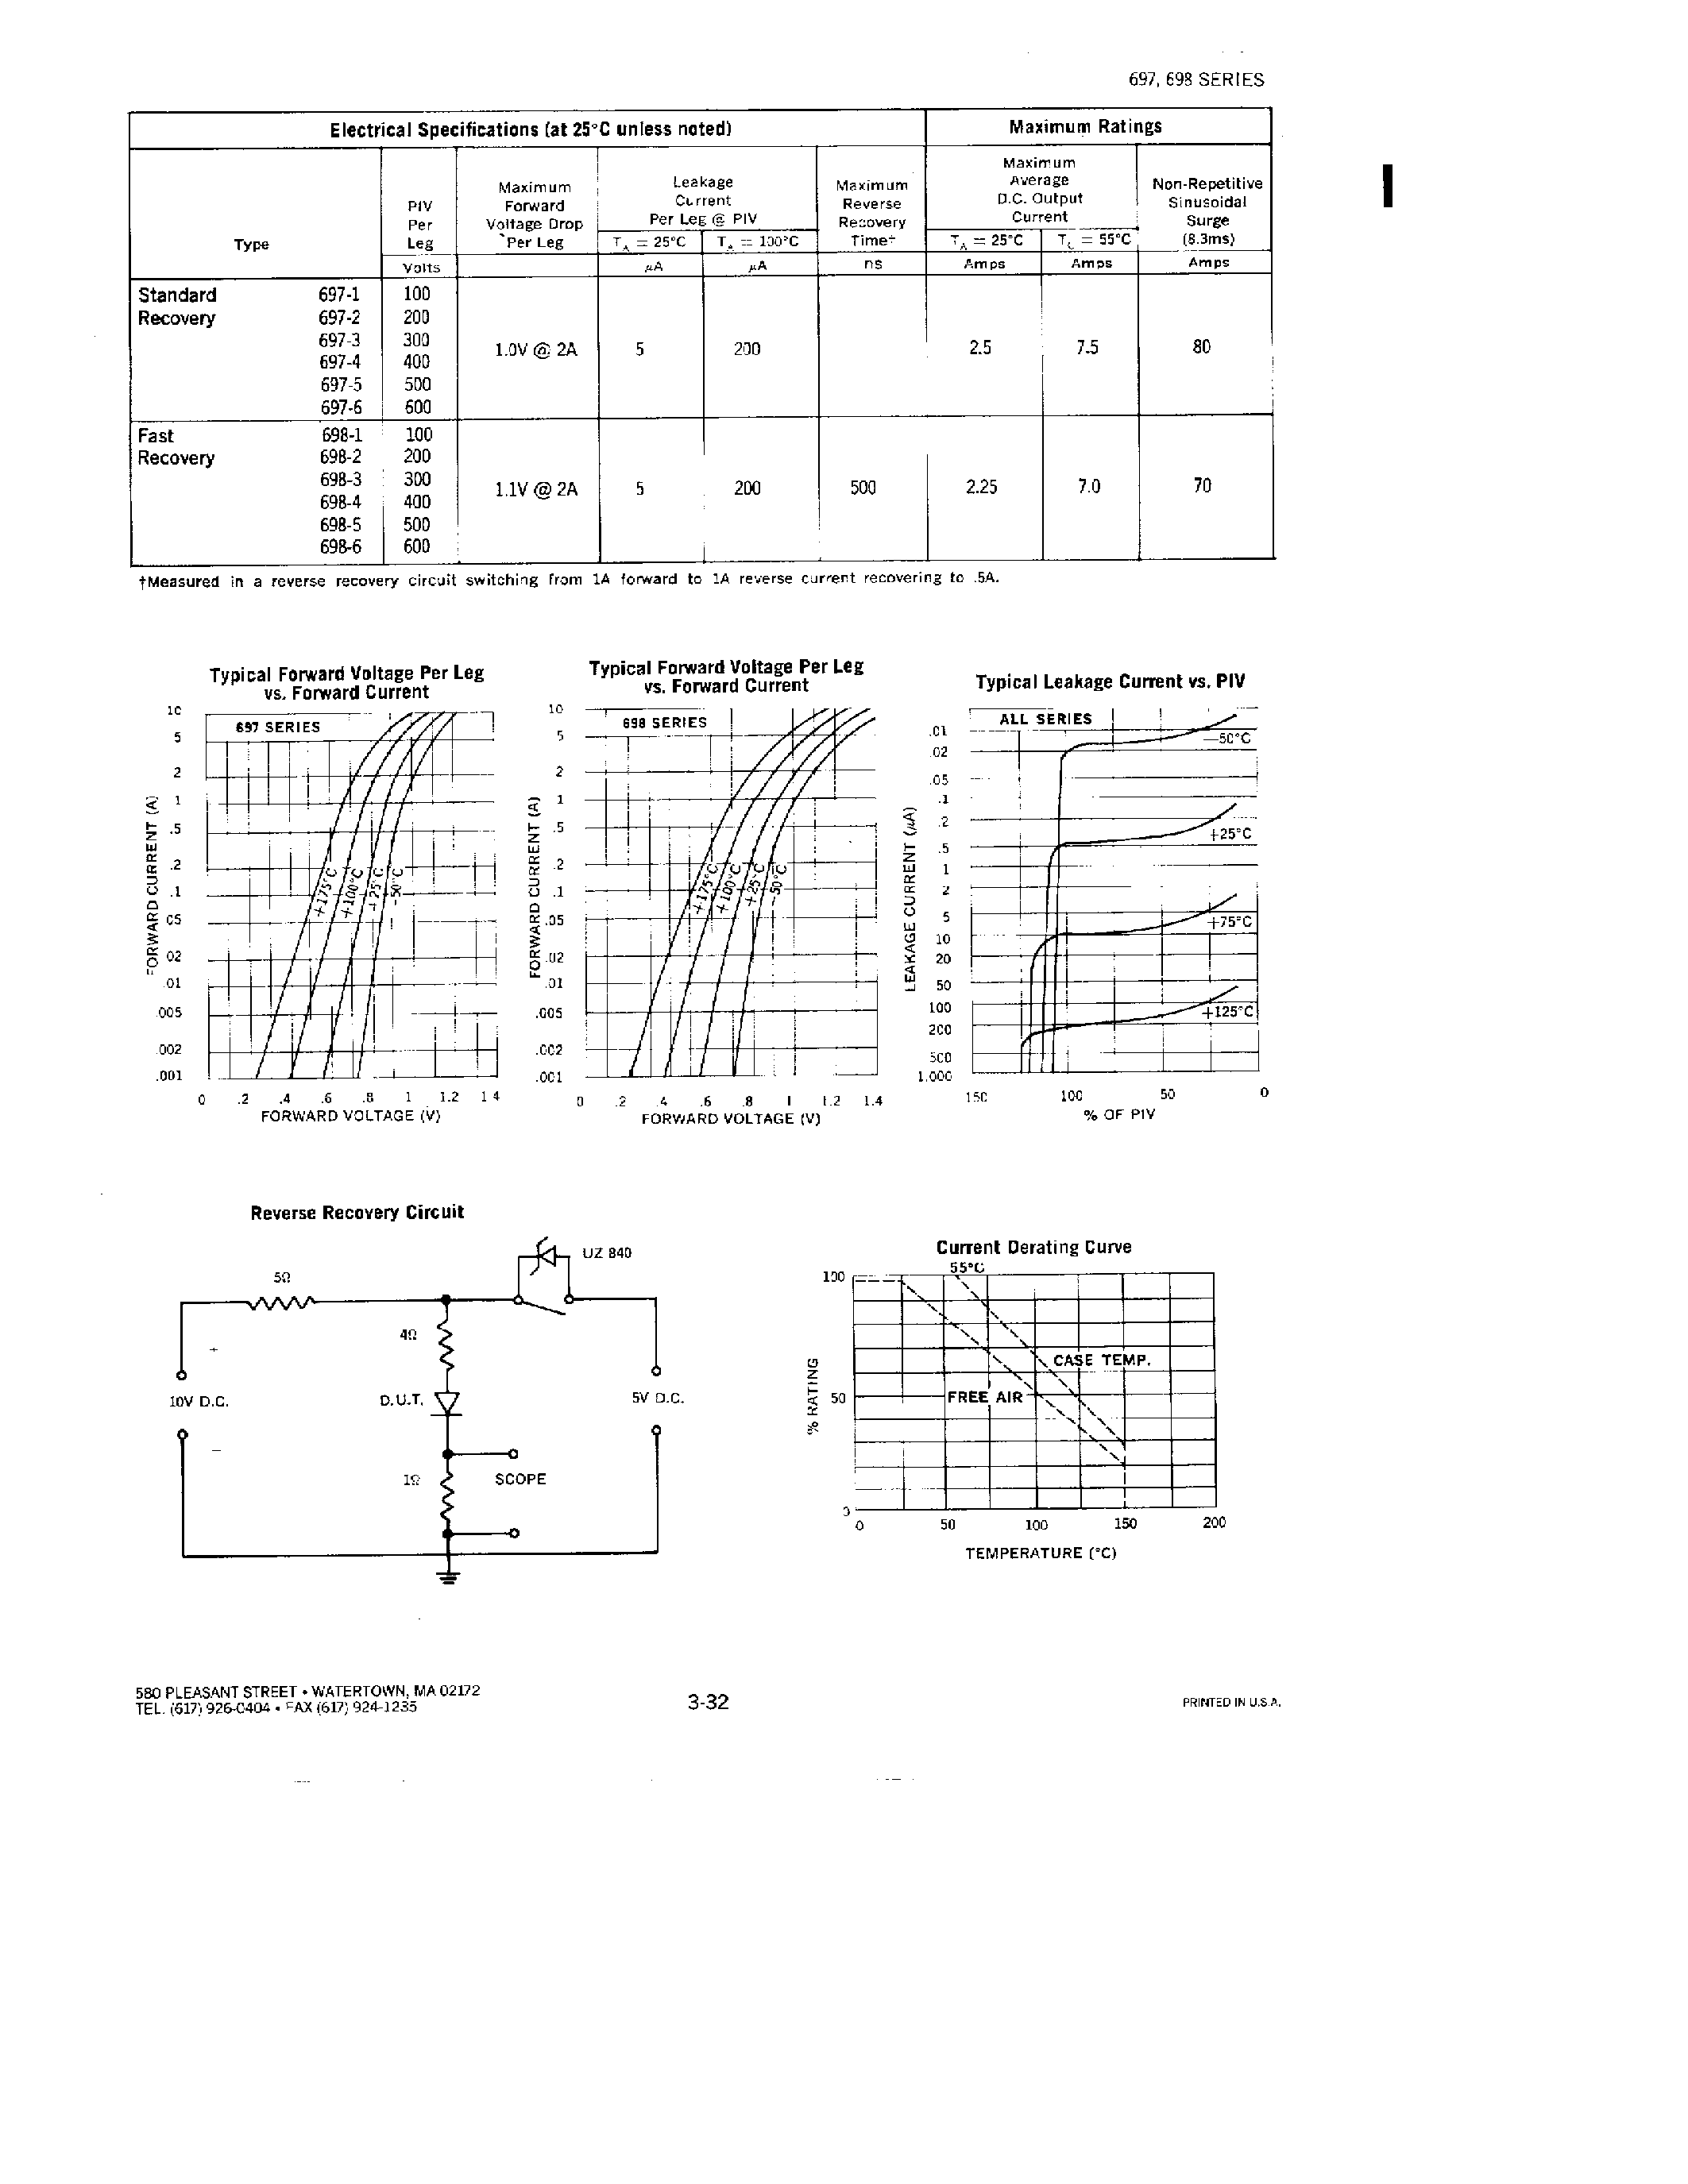 Datasheet 697-6 - RECTIFIERS ASSEMBLIES SINGLE PHASE BRIDGES/ 7.5 AMP/ STANDARD AND FAST RECOVERY page 2